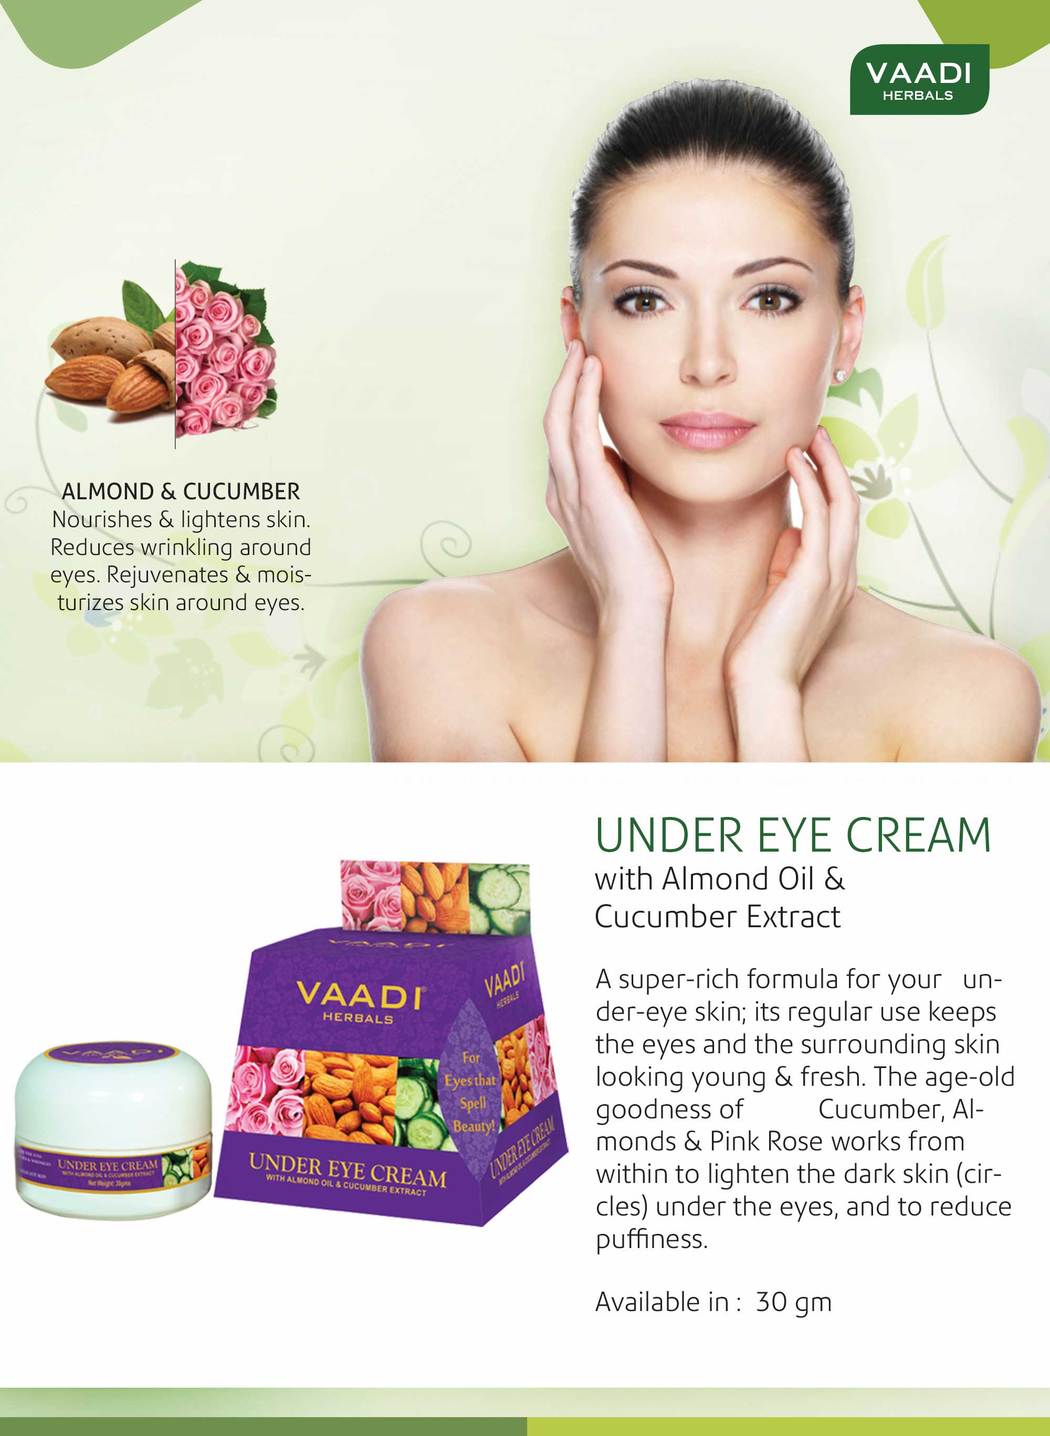 Organic Under Eye Cream with Almond Oil & Cucumber Extract - Reduces Puffiness - Keeps Skin Youthful (3 x 30 gms /1.1 oz)